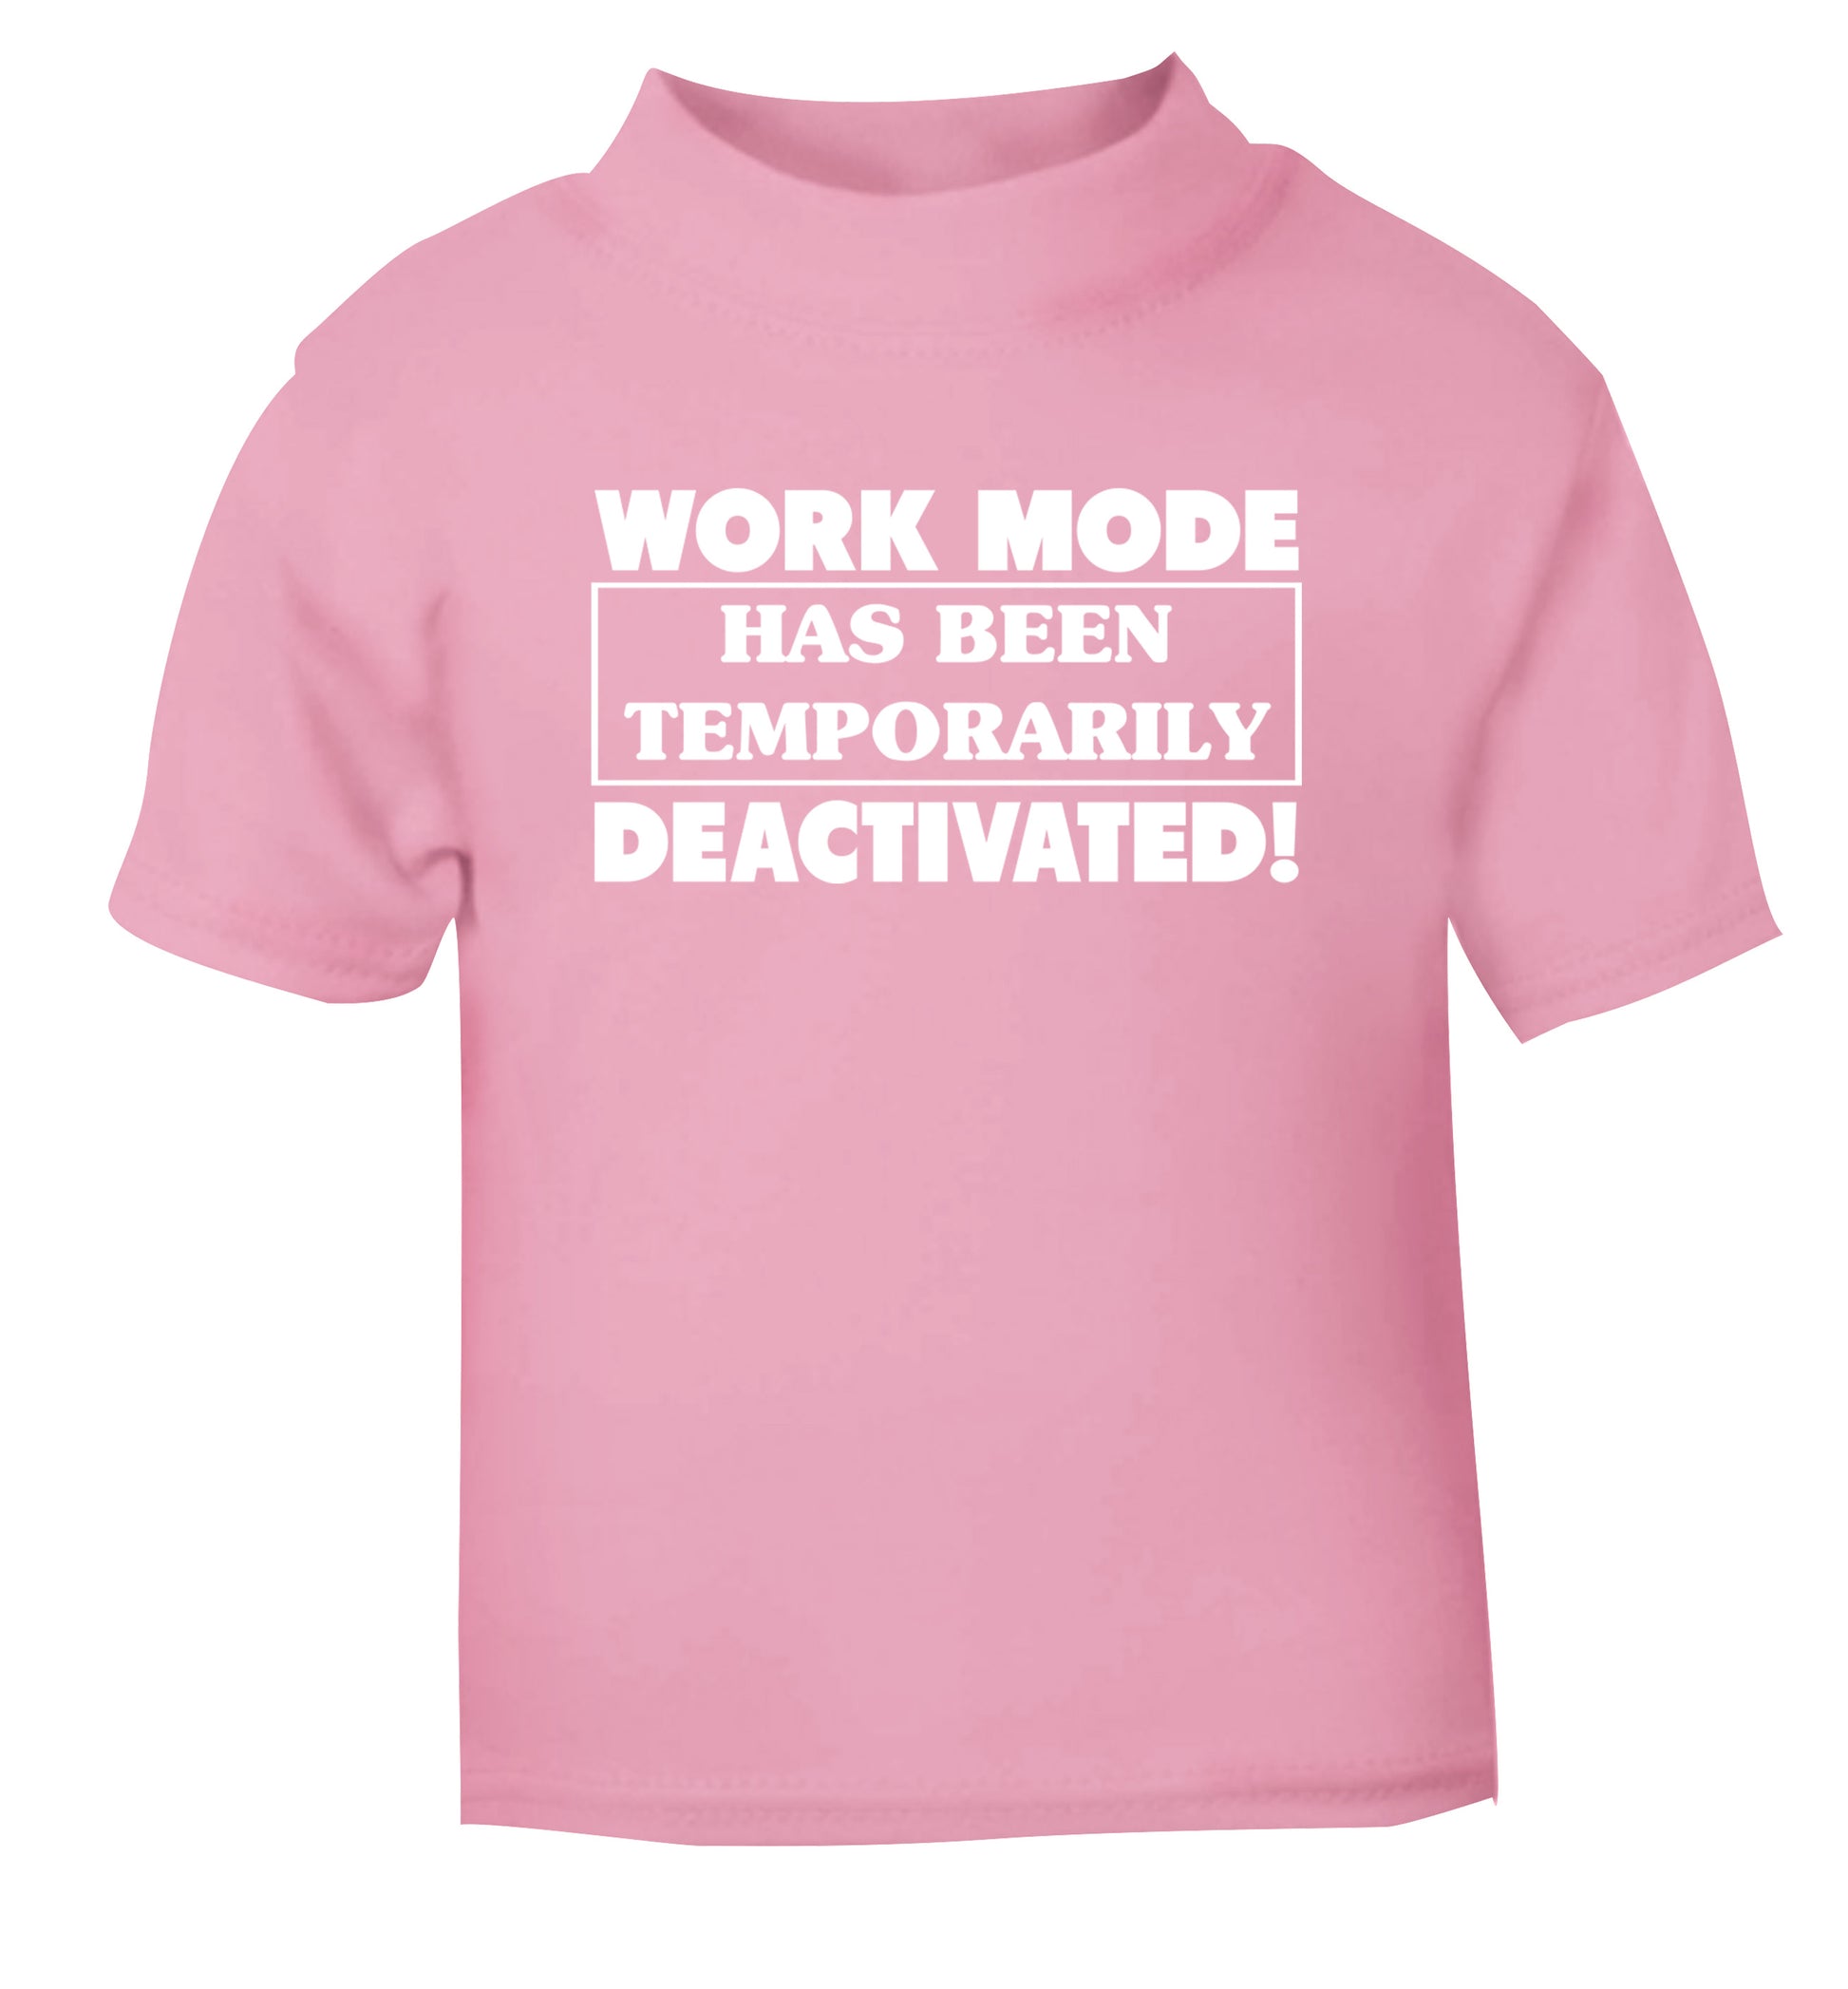 Work mode has now been temporarily deactivated light pink Baby Toddler Tshirt 2 Years